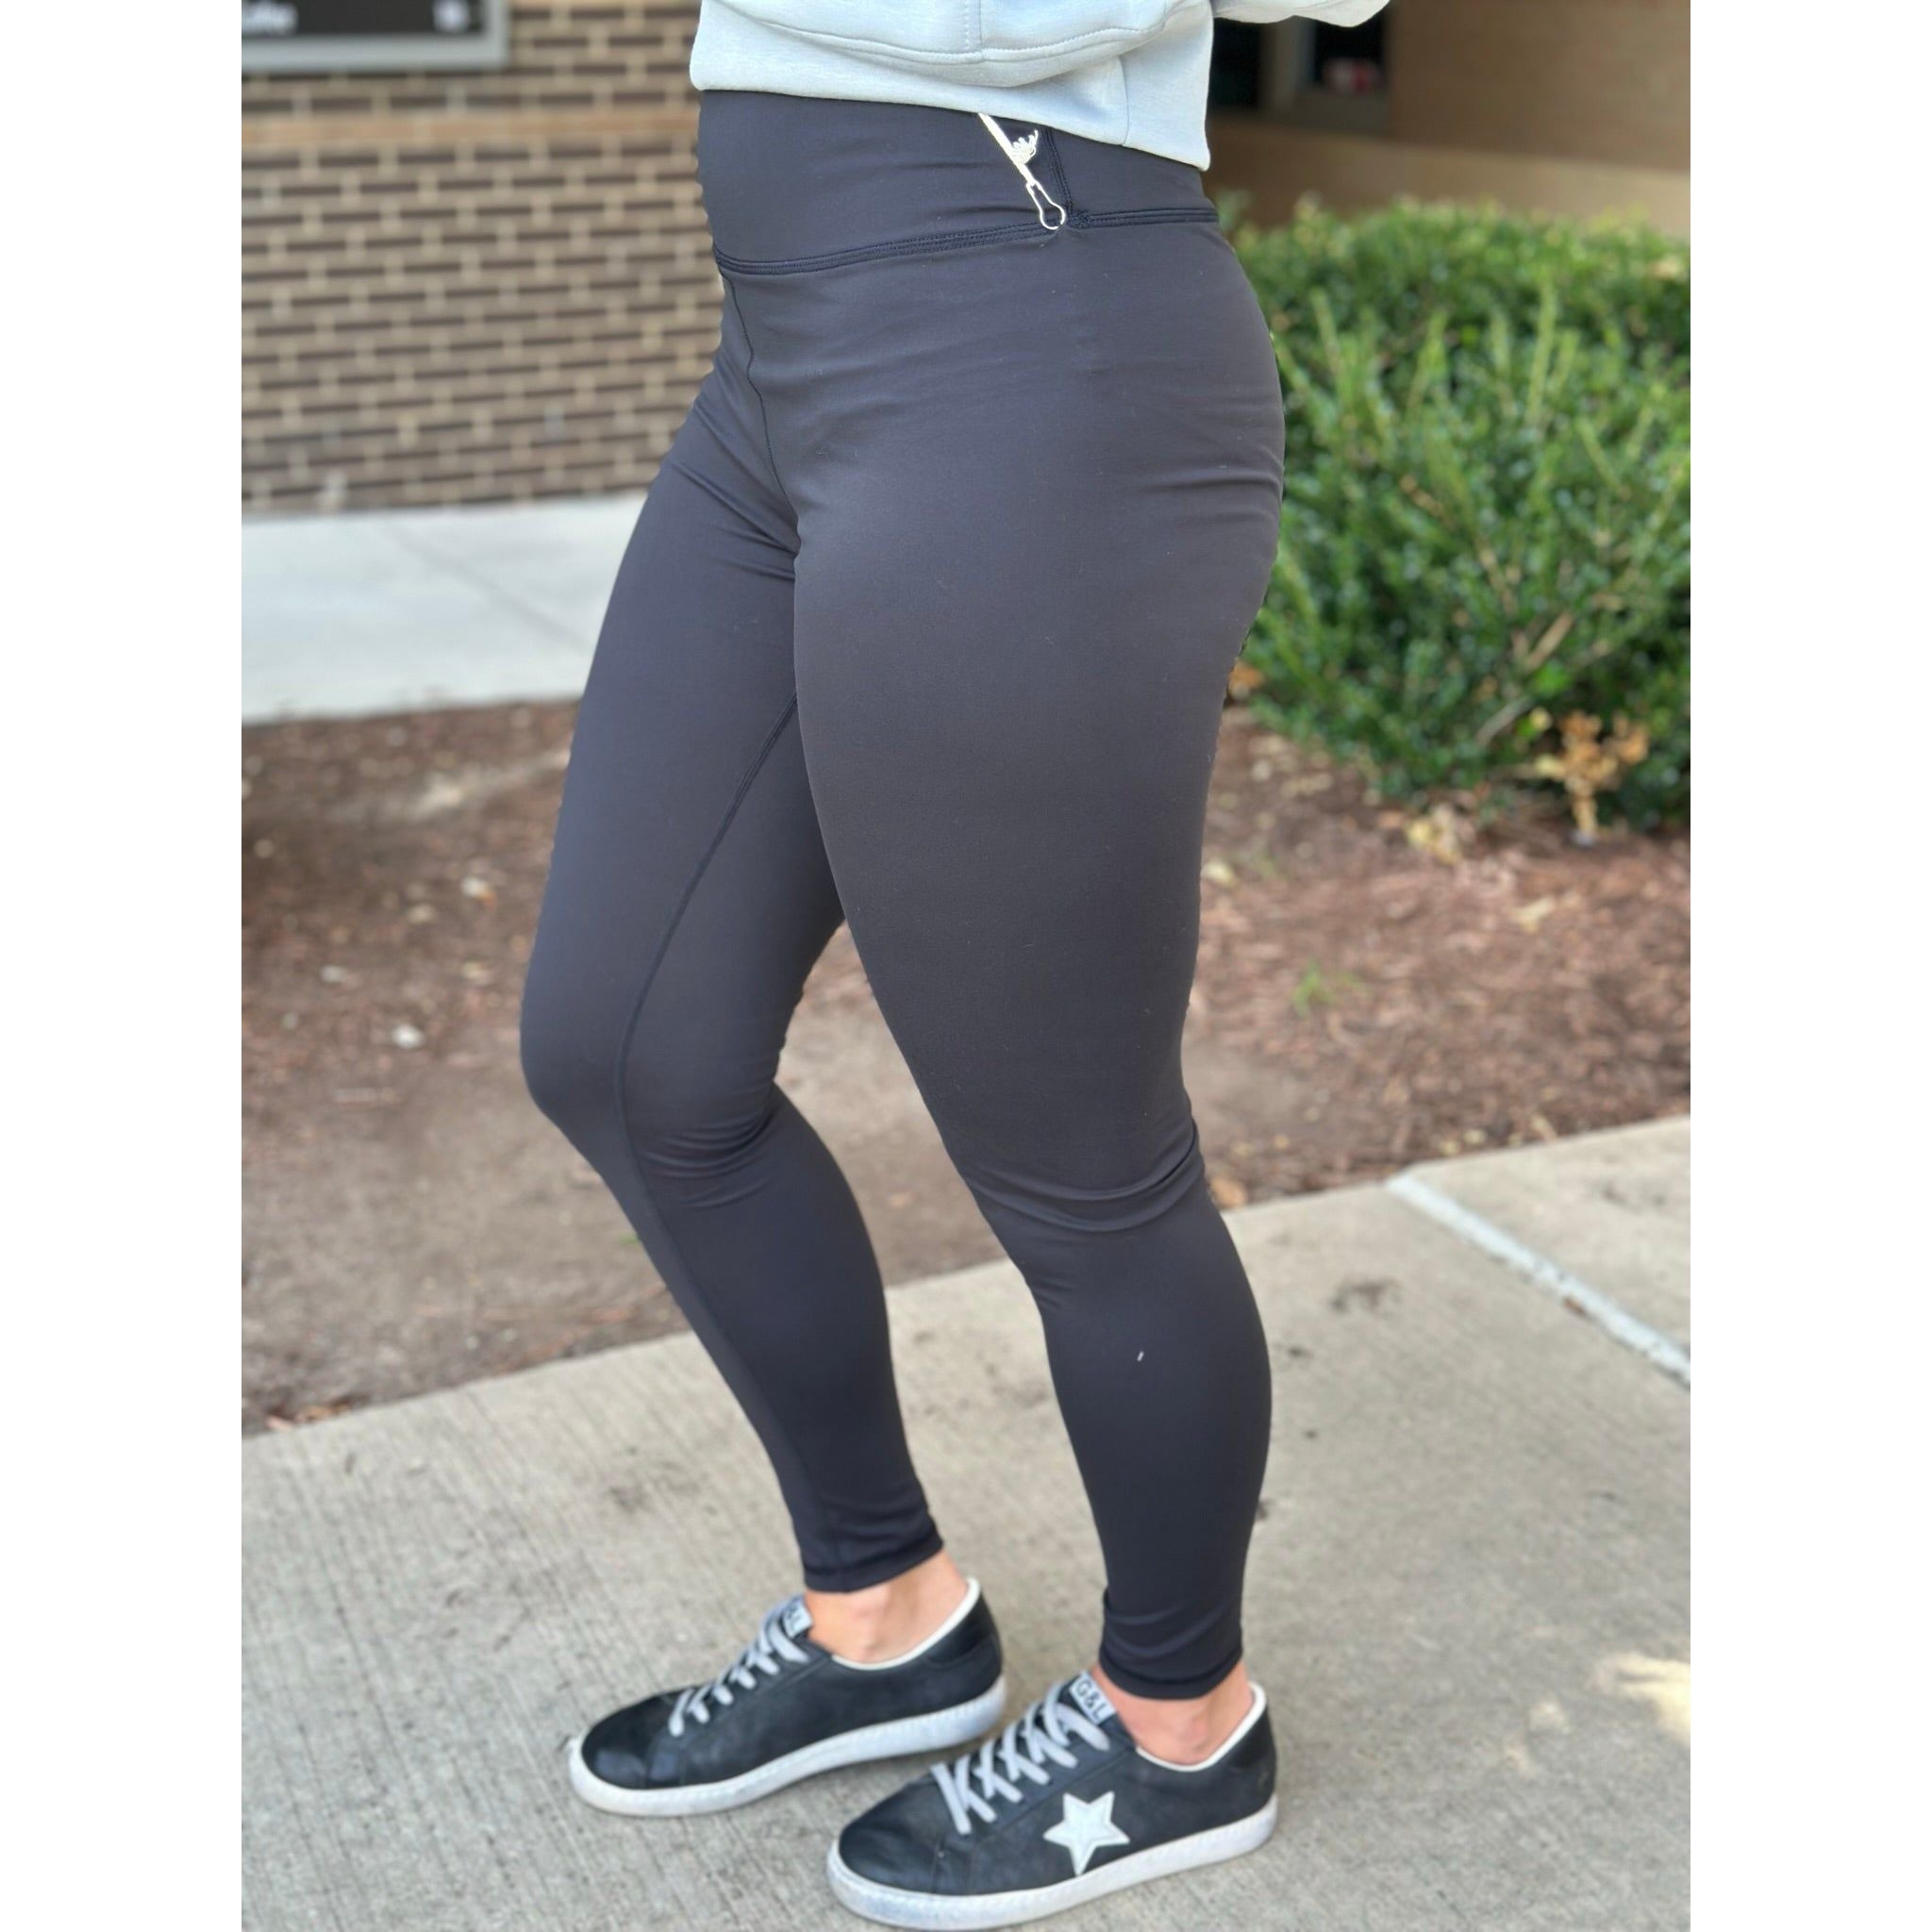 I absolutely love these leggings, they are squat proof and overall super  comfy!” - Elevate V2 Black Seamless Leggings - Brielle W ♾️…